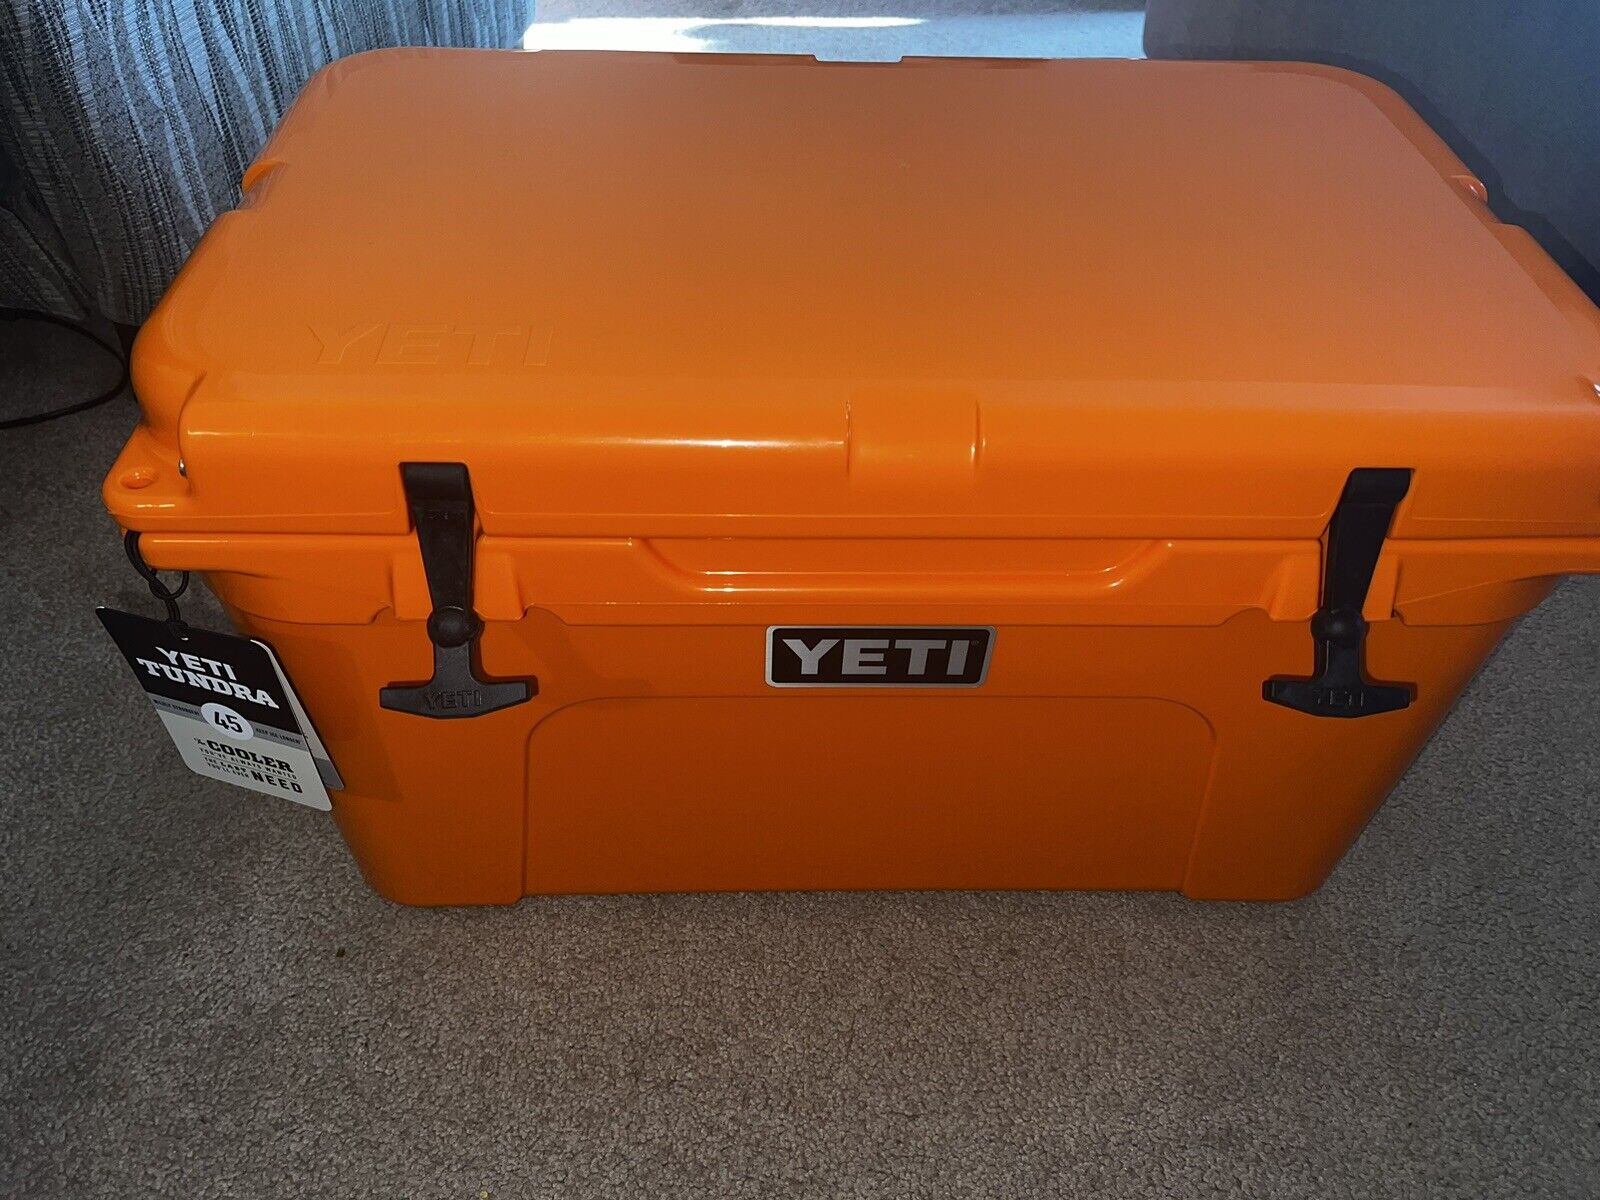 Let me tell you about the saga of the burnt orange Yeti : r/YetiCoolers